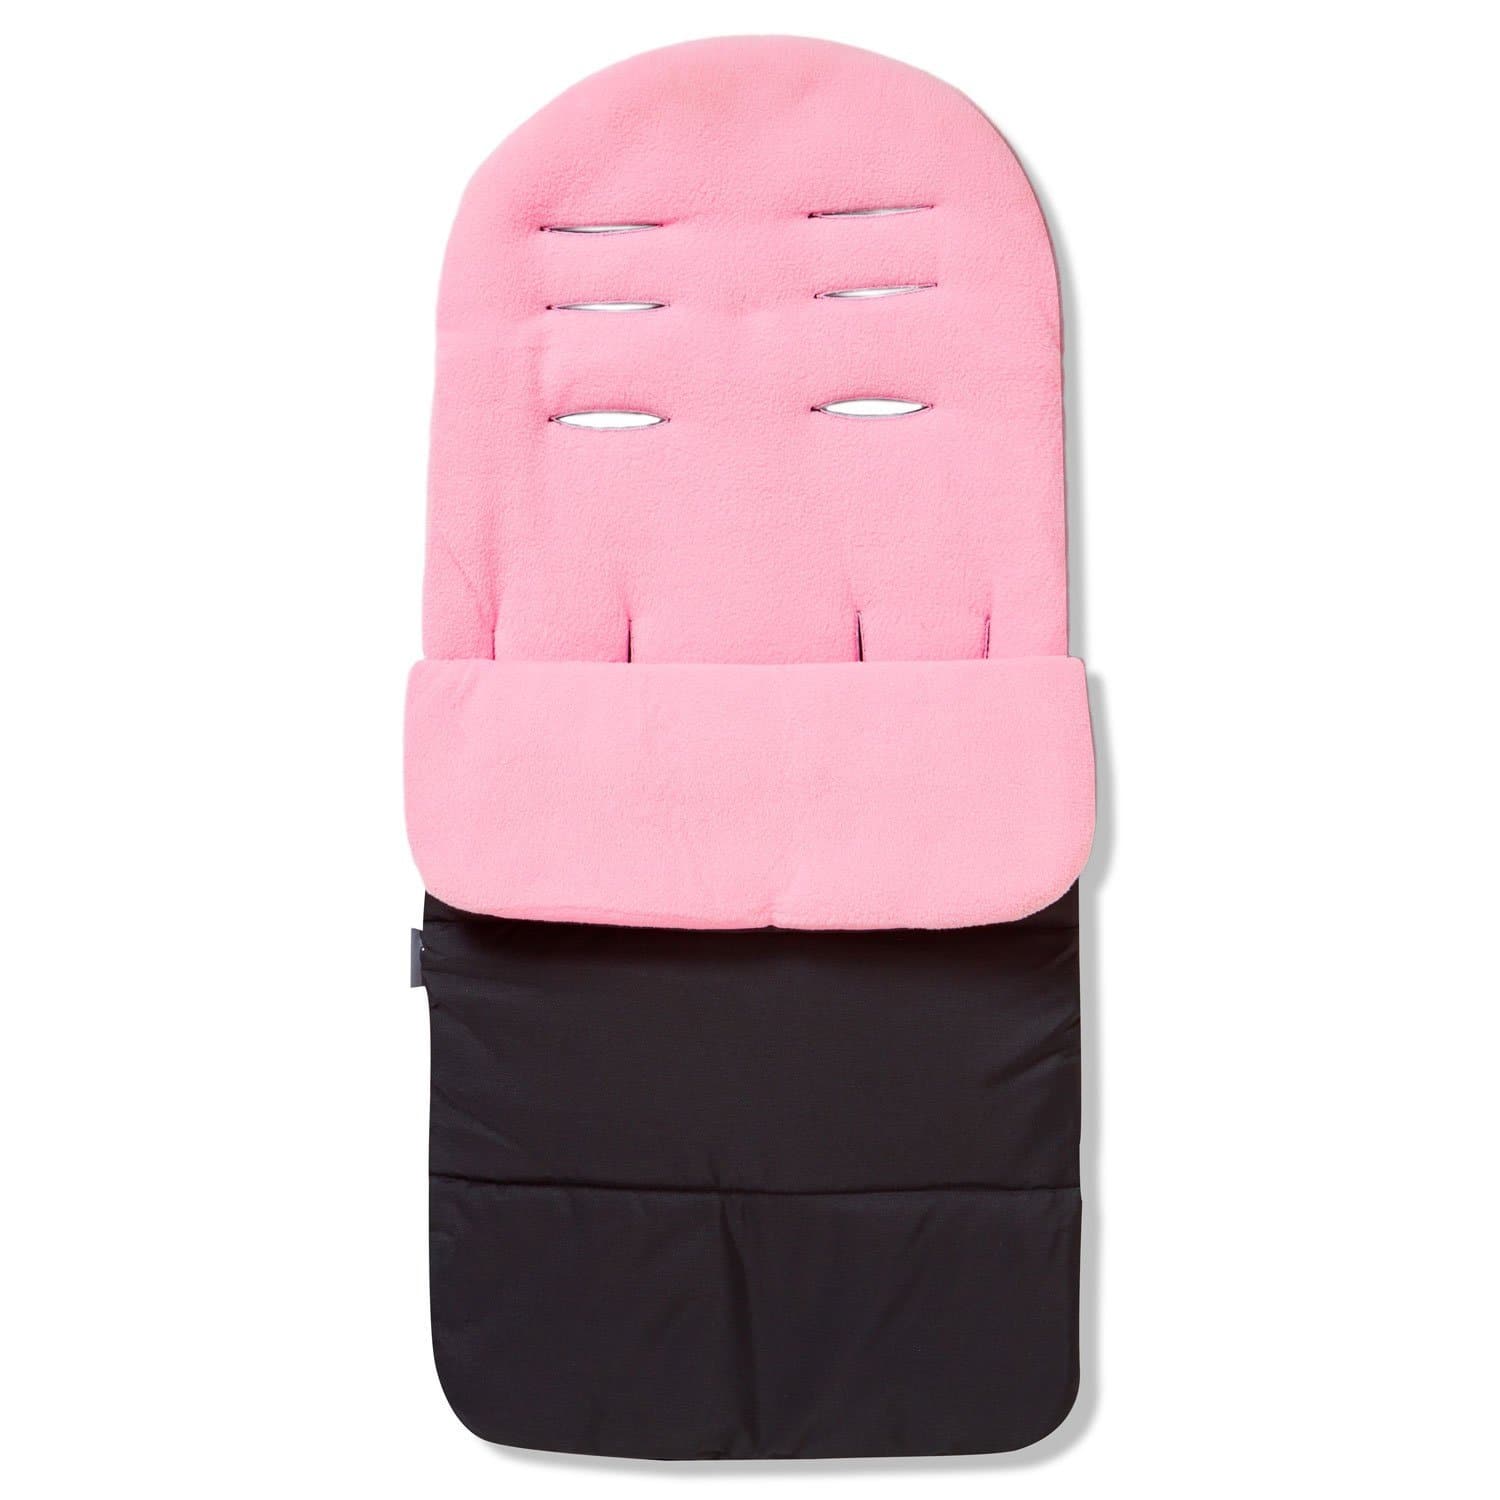 Premium Footmuff / Cosy Toes Compatible with Hauck - Candy Pink / Fits All Models | For Your Little One